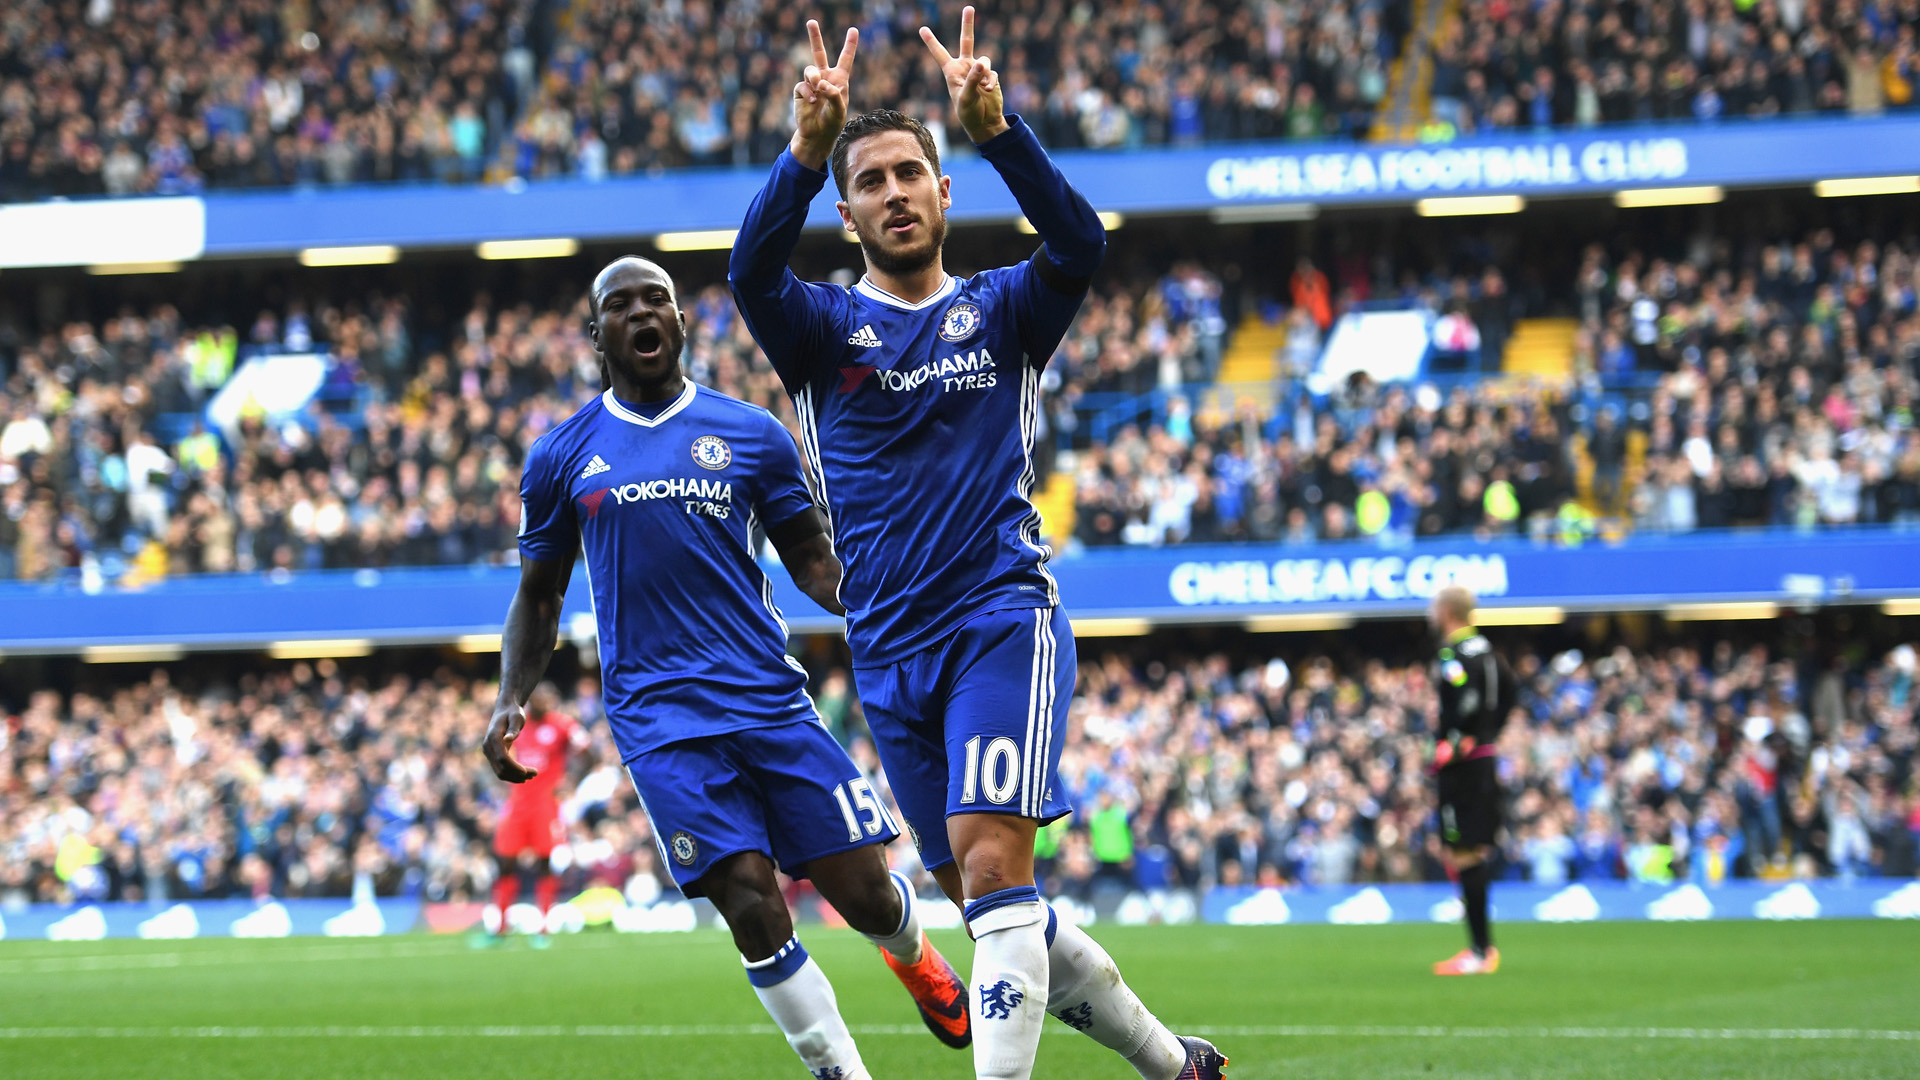 LONDON, ENGLAND - OCTOBER 15: Eden Hazard of Chelsea celebrates scoring his sides second goal during the Premier League match between Chelsea and Leicester City at Stamford Bridge on October 15, 2016 in London, England.  (Photo by Shaun Botterill/Getty Images)